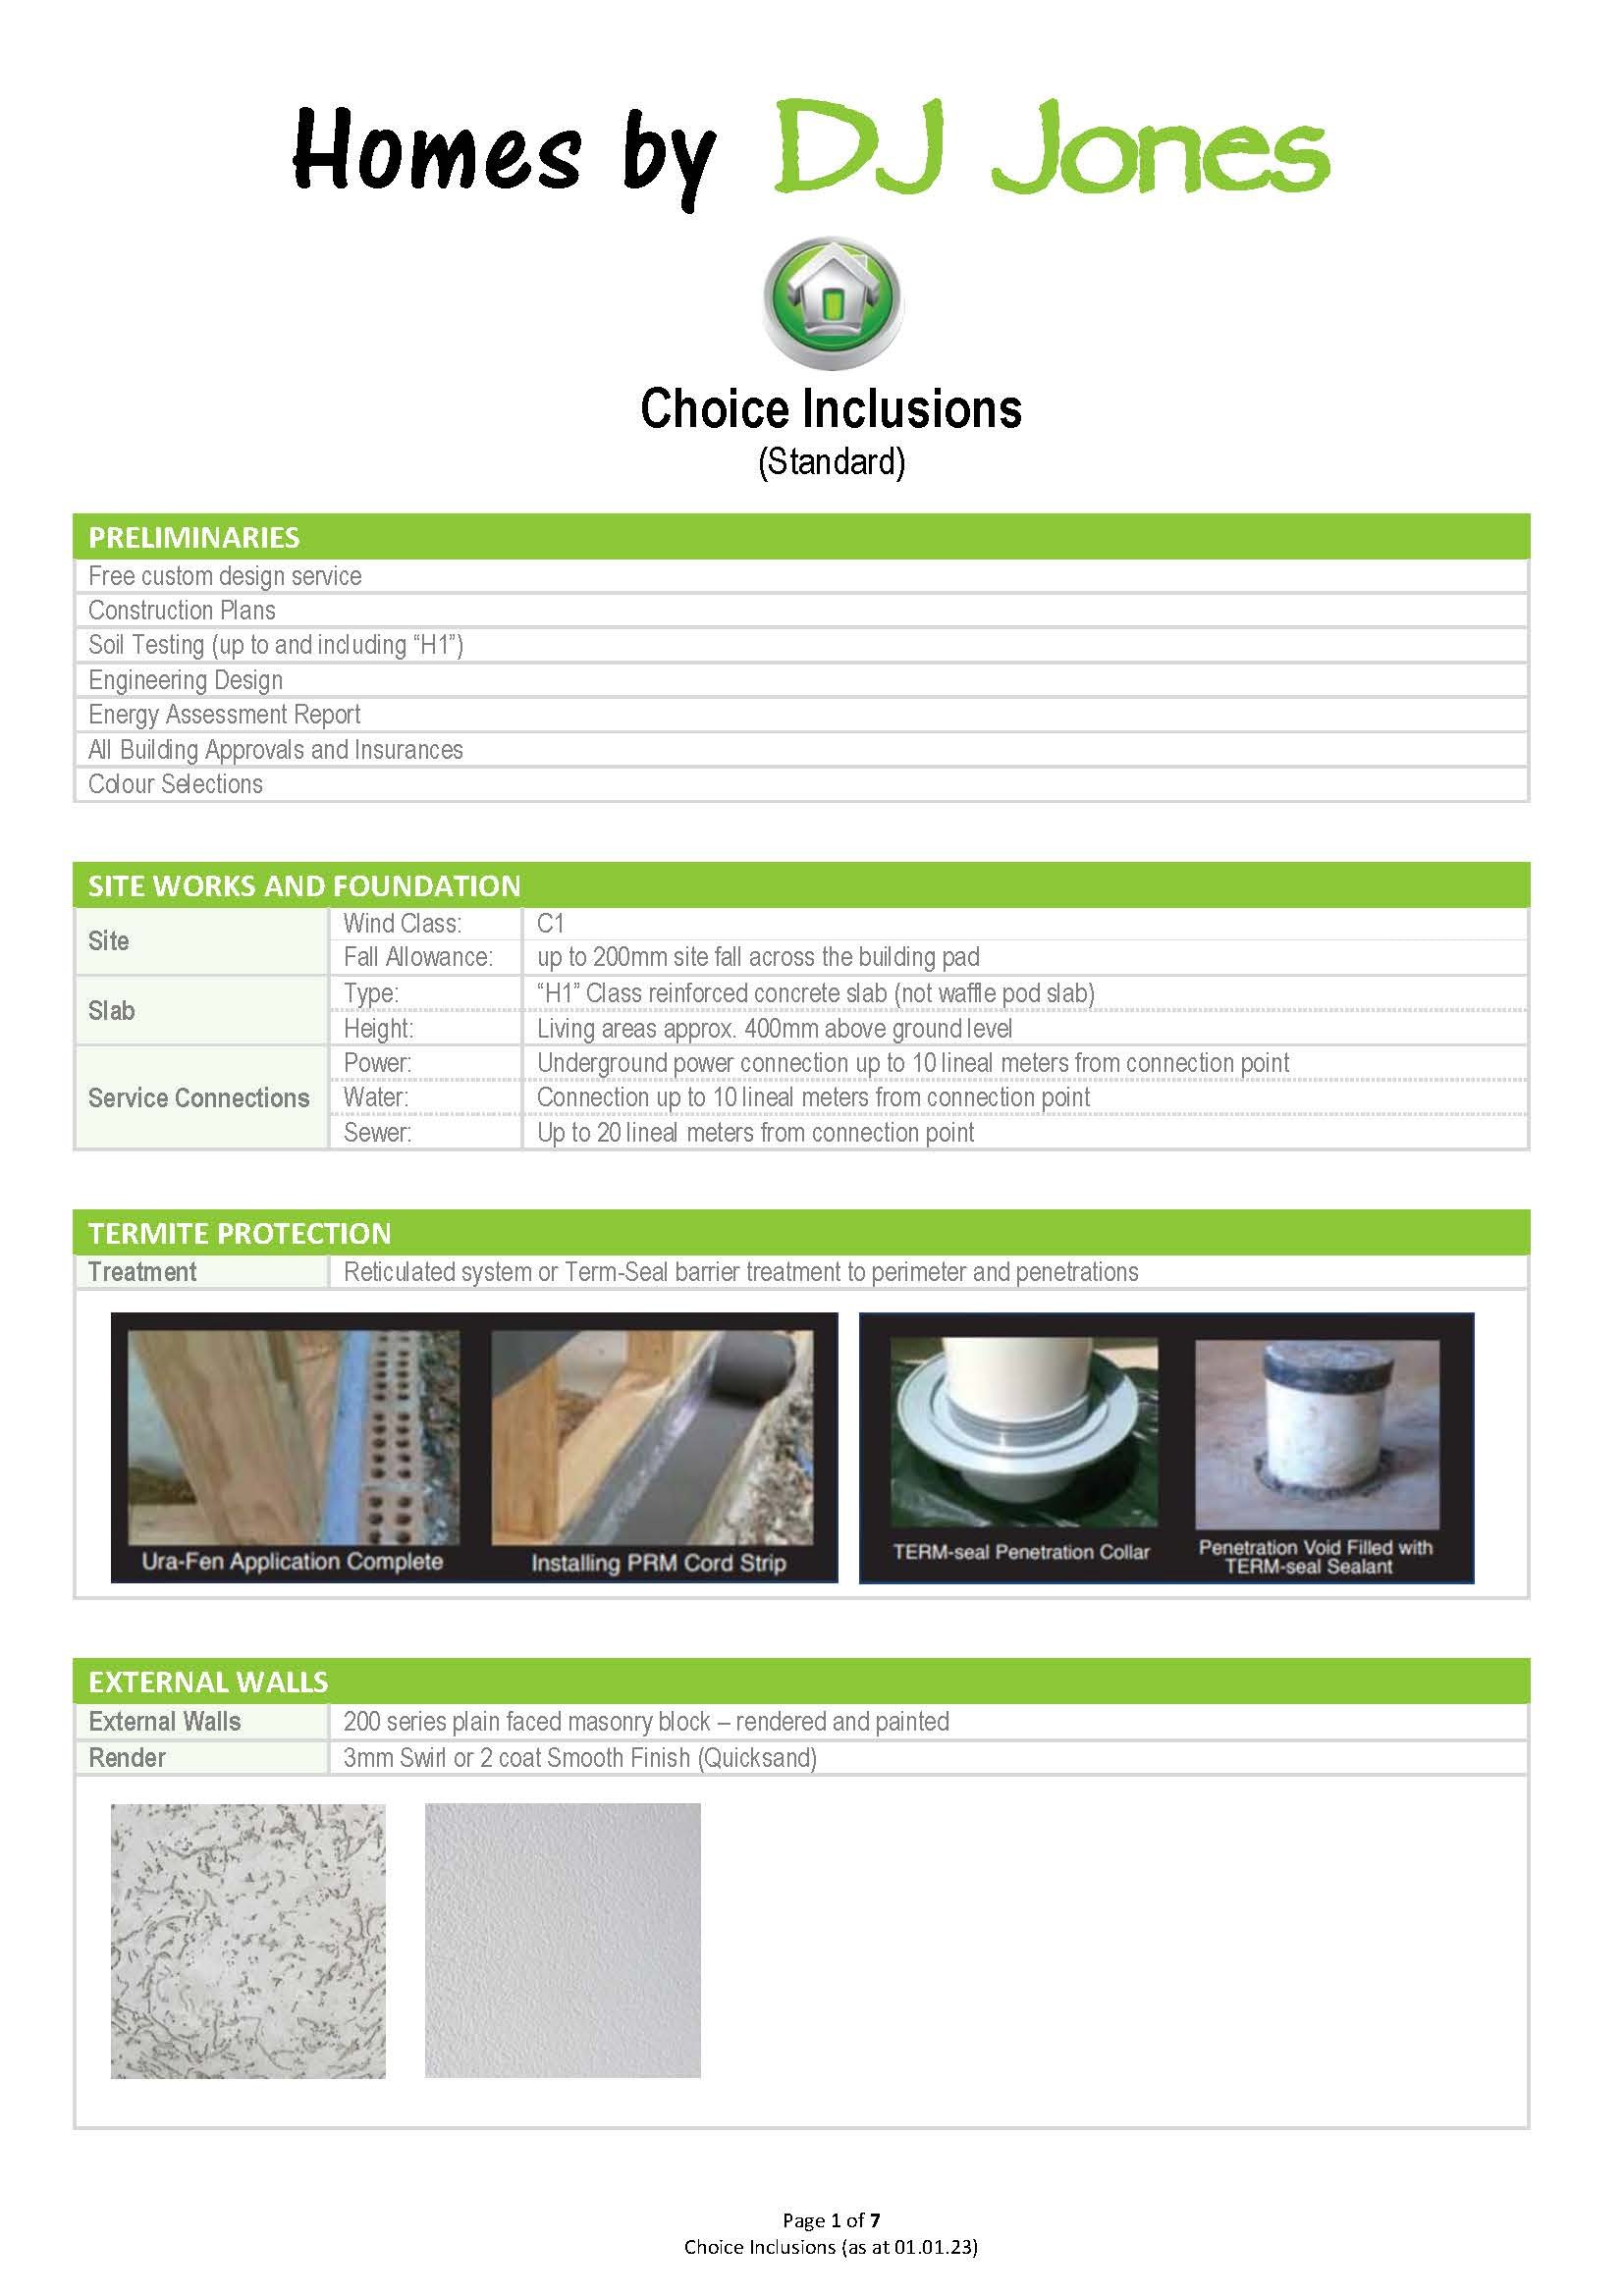 Inclusions Brochure - Choice (Standard) 01.01.23_Page_2.jpg